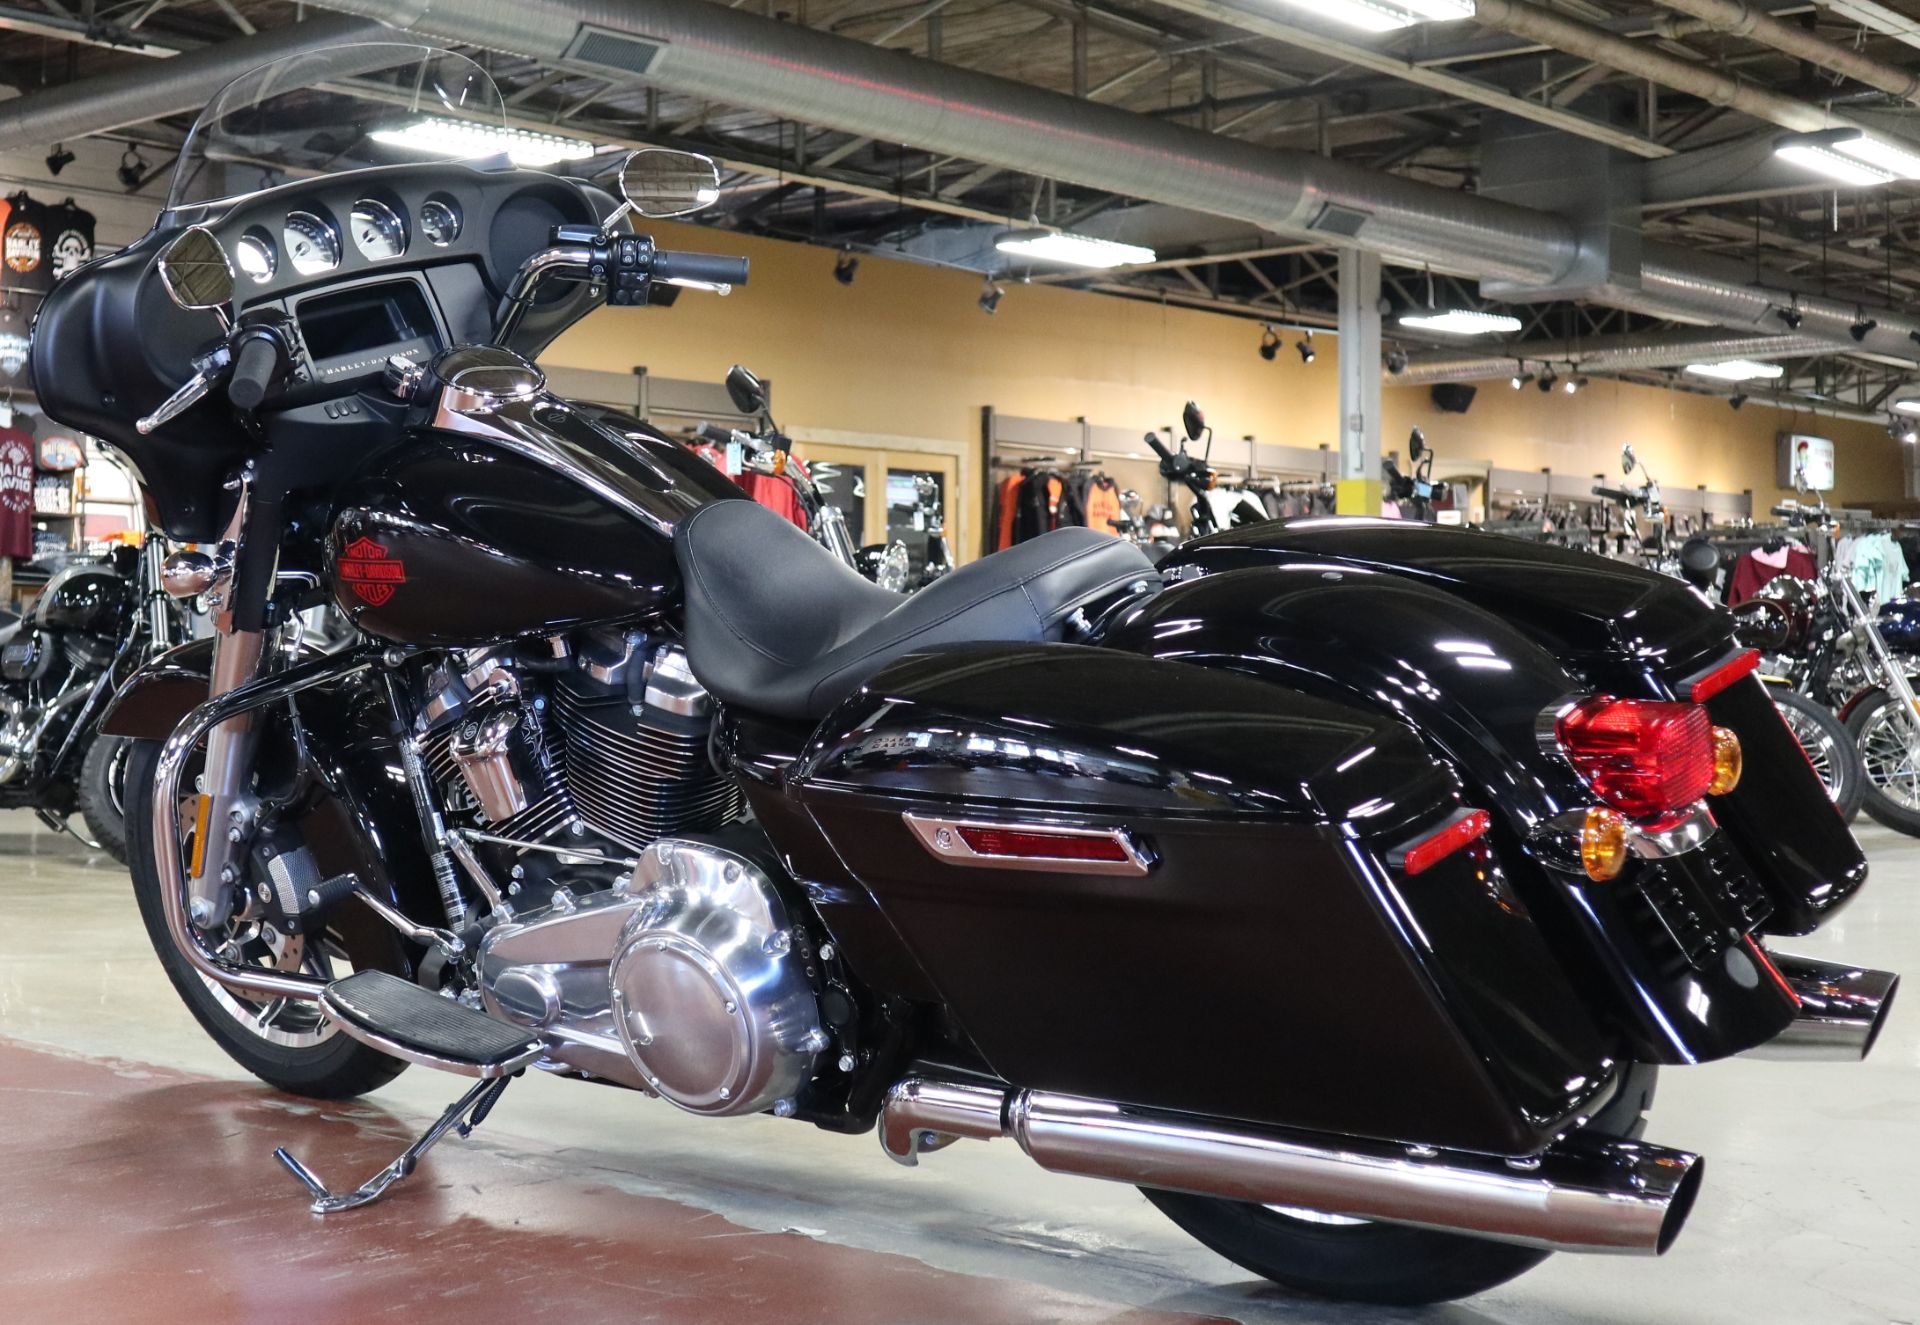 2021 Harley-Davidson Electra Glide® Standard in New London, Connecticut - Photo 6